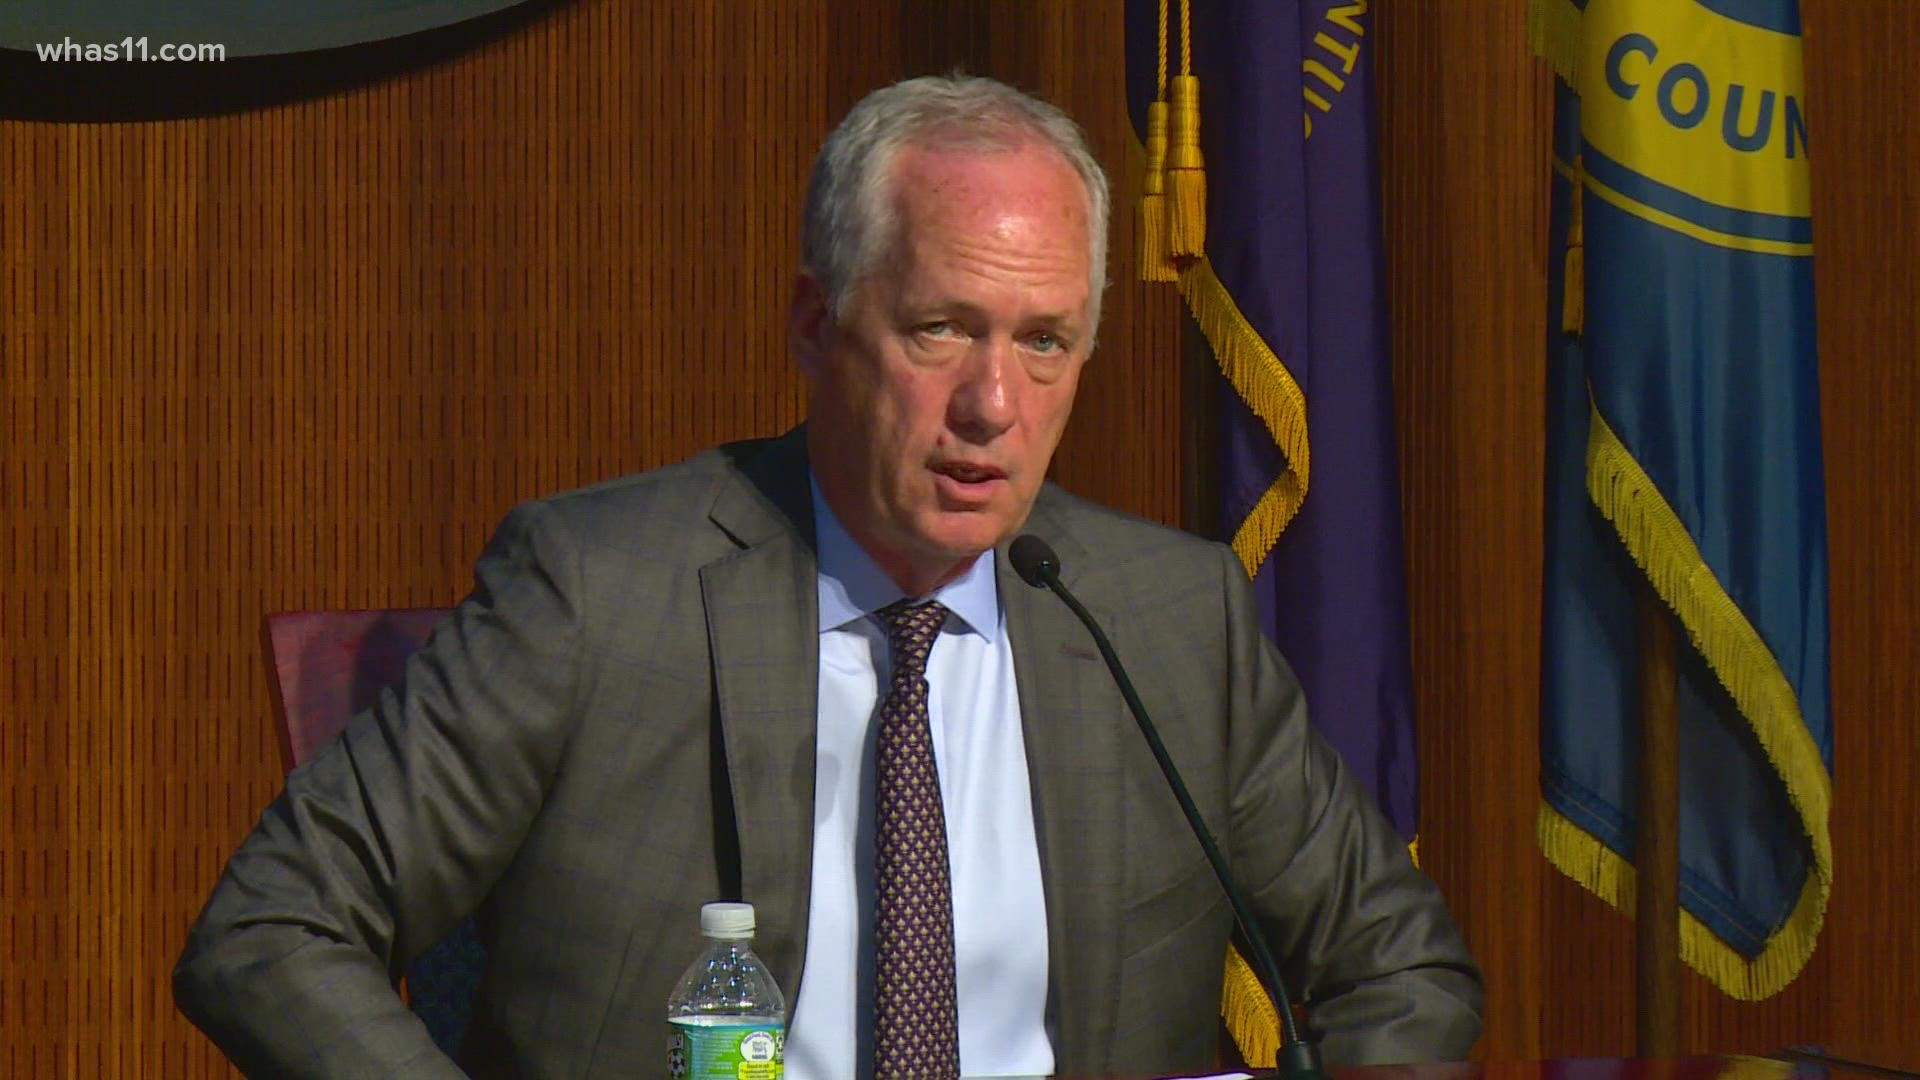 In his 12th and final budget address, Mayor Greg Fischer is proposing a budget of $1.3 billion for the 2022-23 fiscal year - the largest in Louisville history.